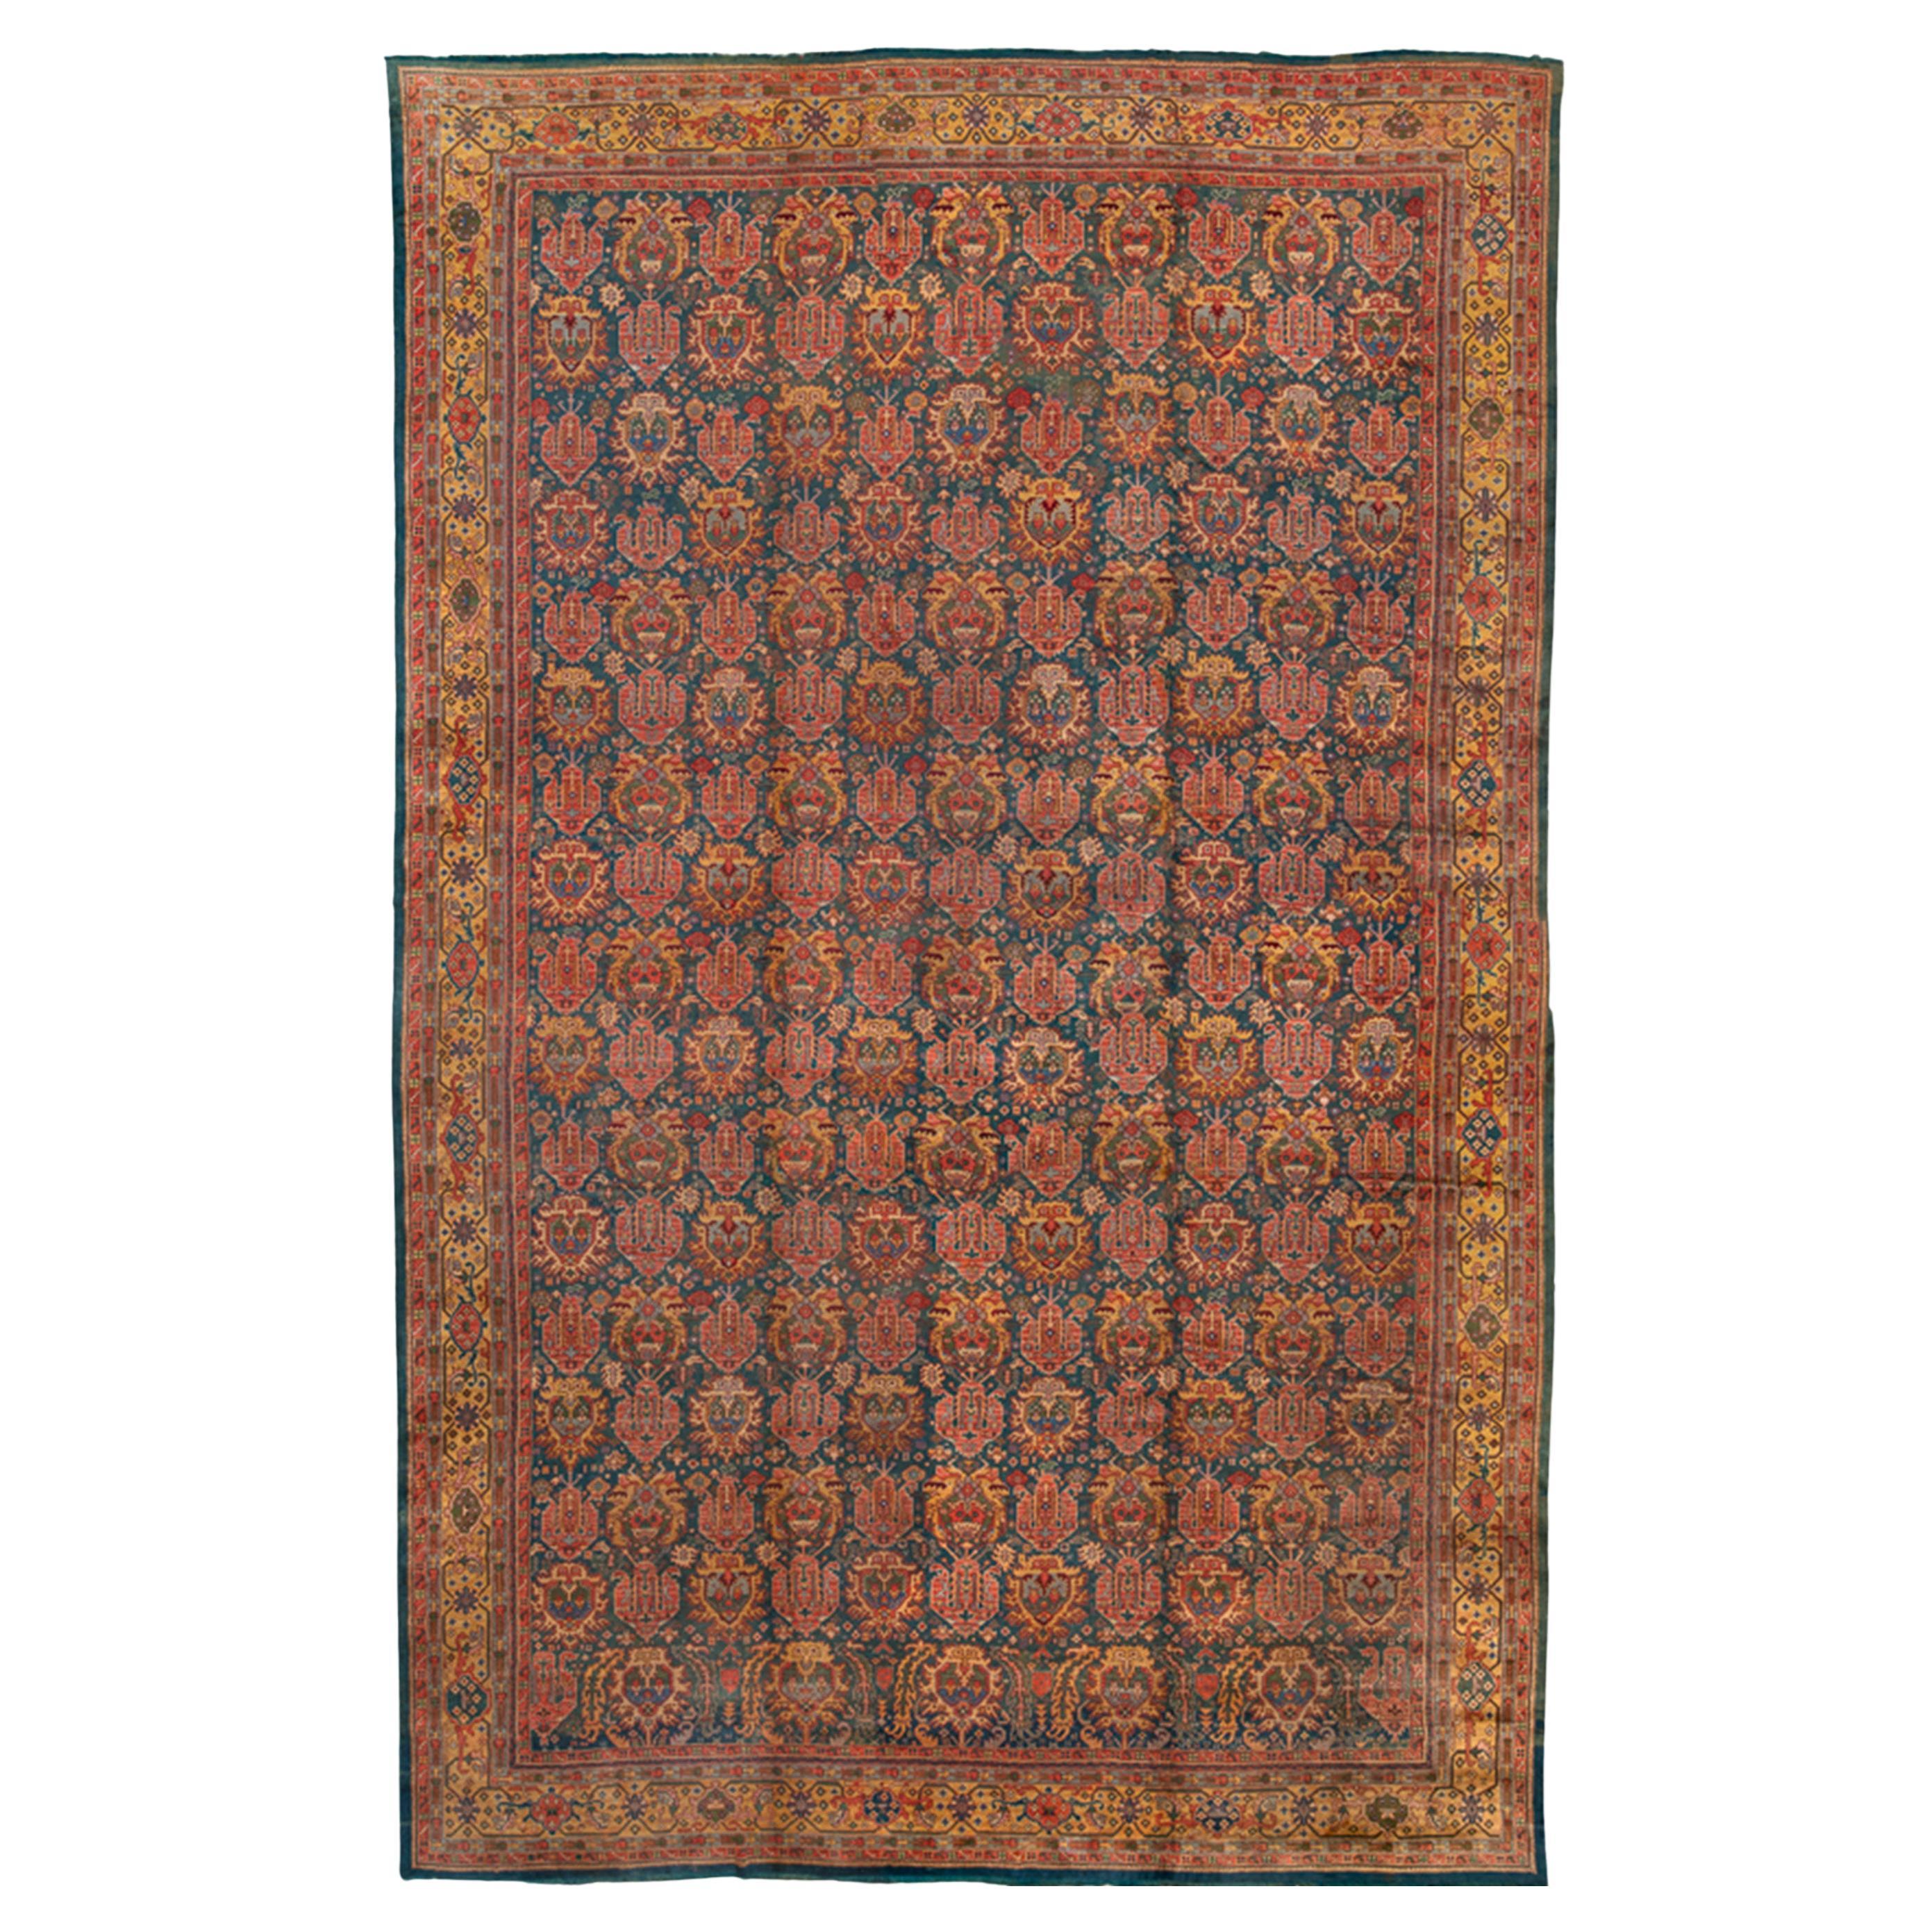 Antique Turkish Oushak Handwoven Luxury Wool Multi Rug 18'-6" x 23'-3" Size For Sale